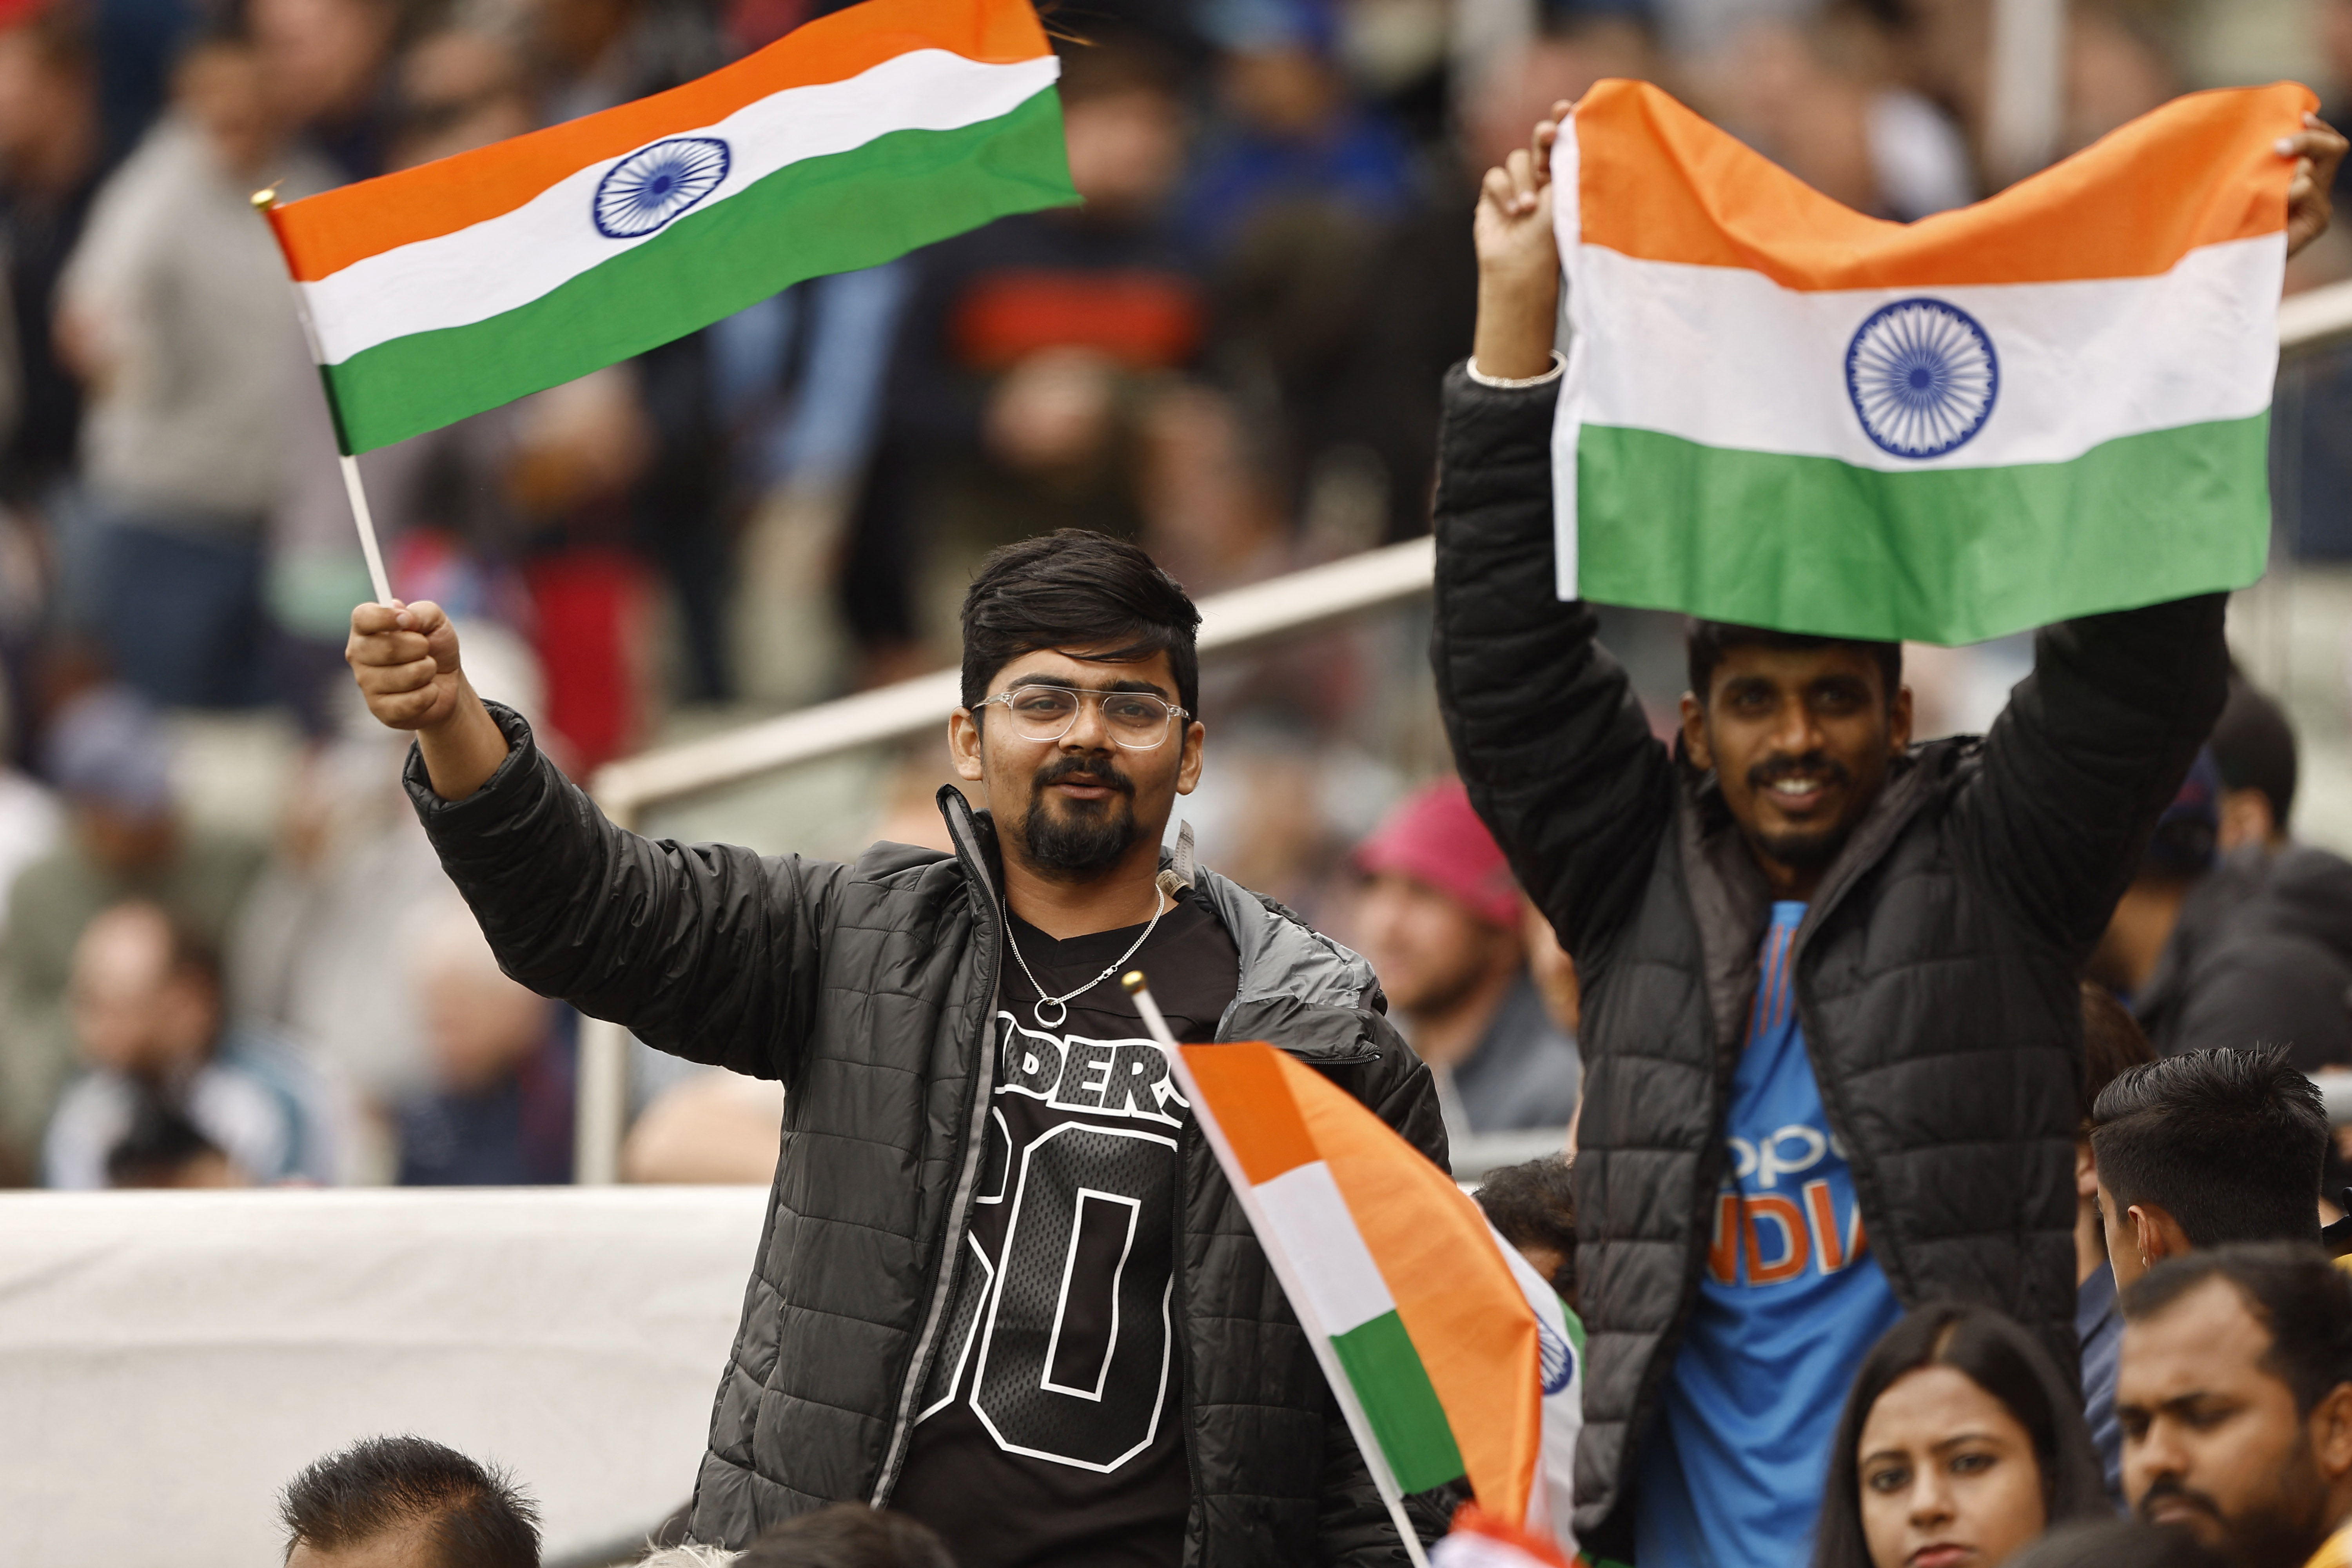 Indian fans racially abused in Edgbaston, 'reduced to tears'; Azeem Rafiq demands investigation and apology